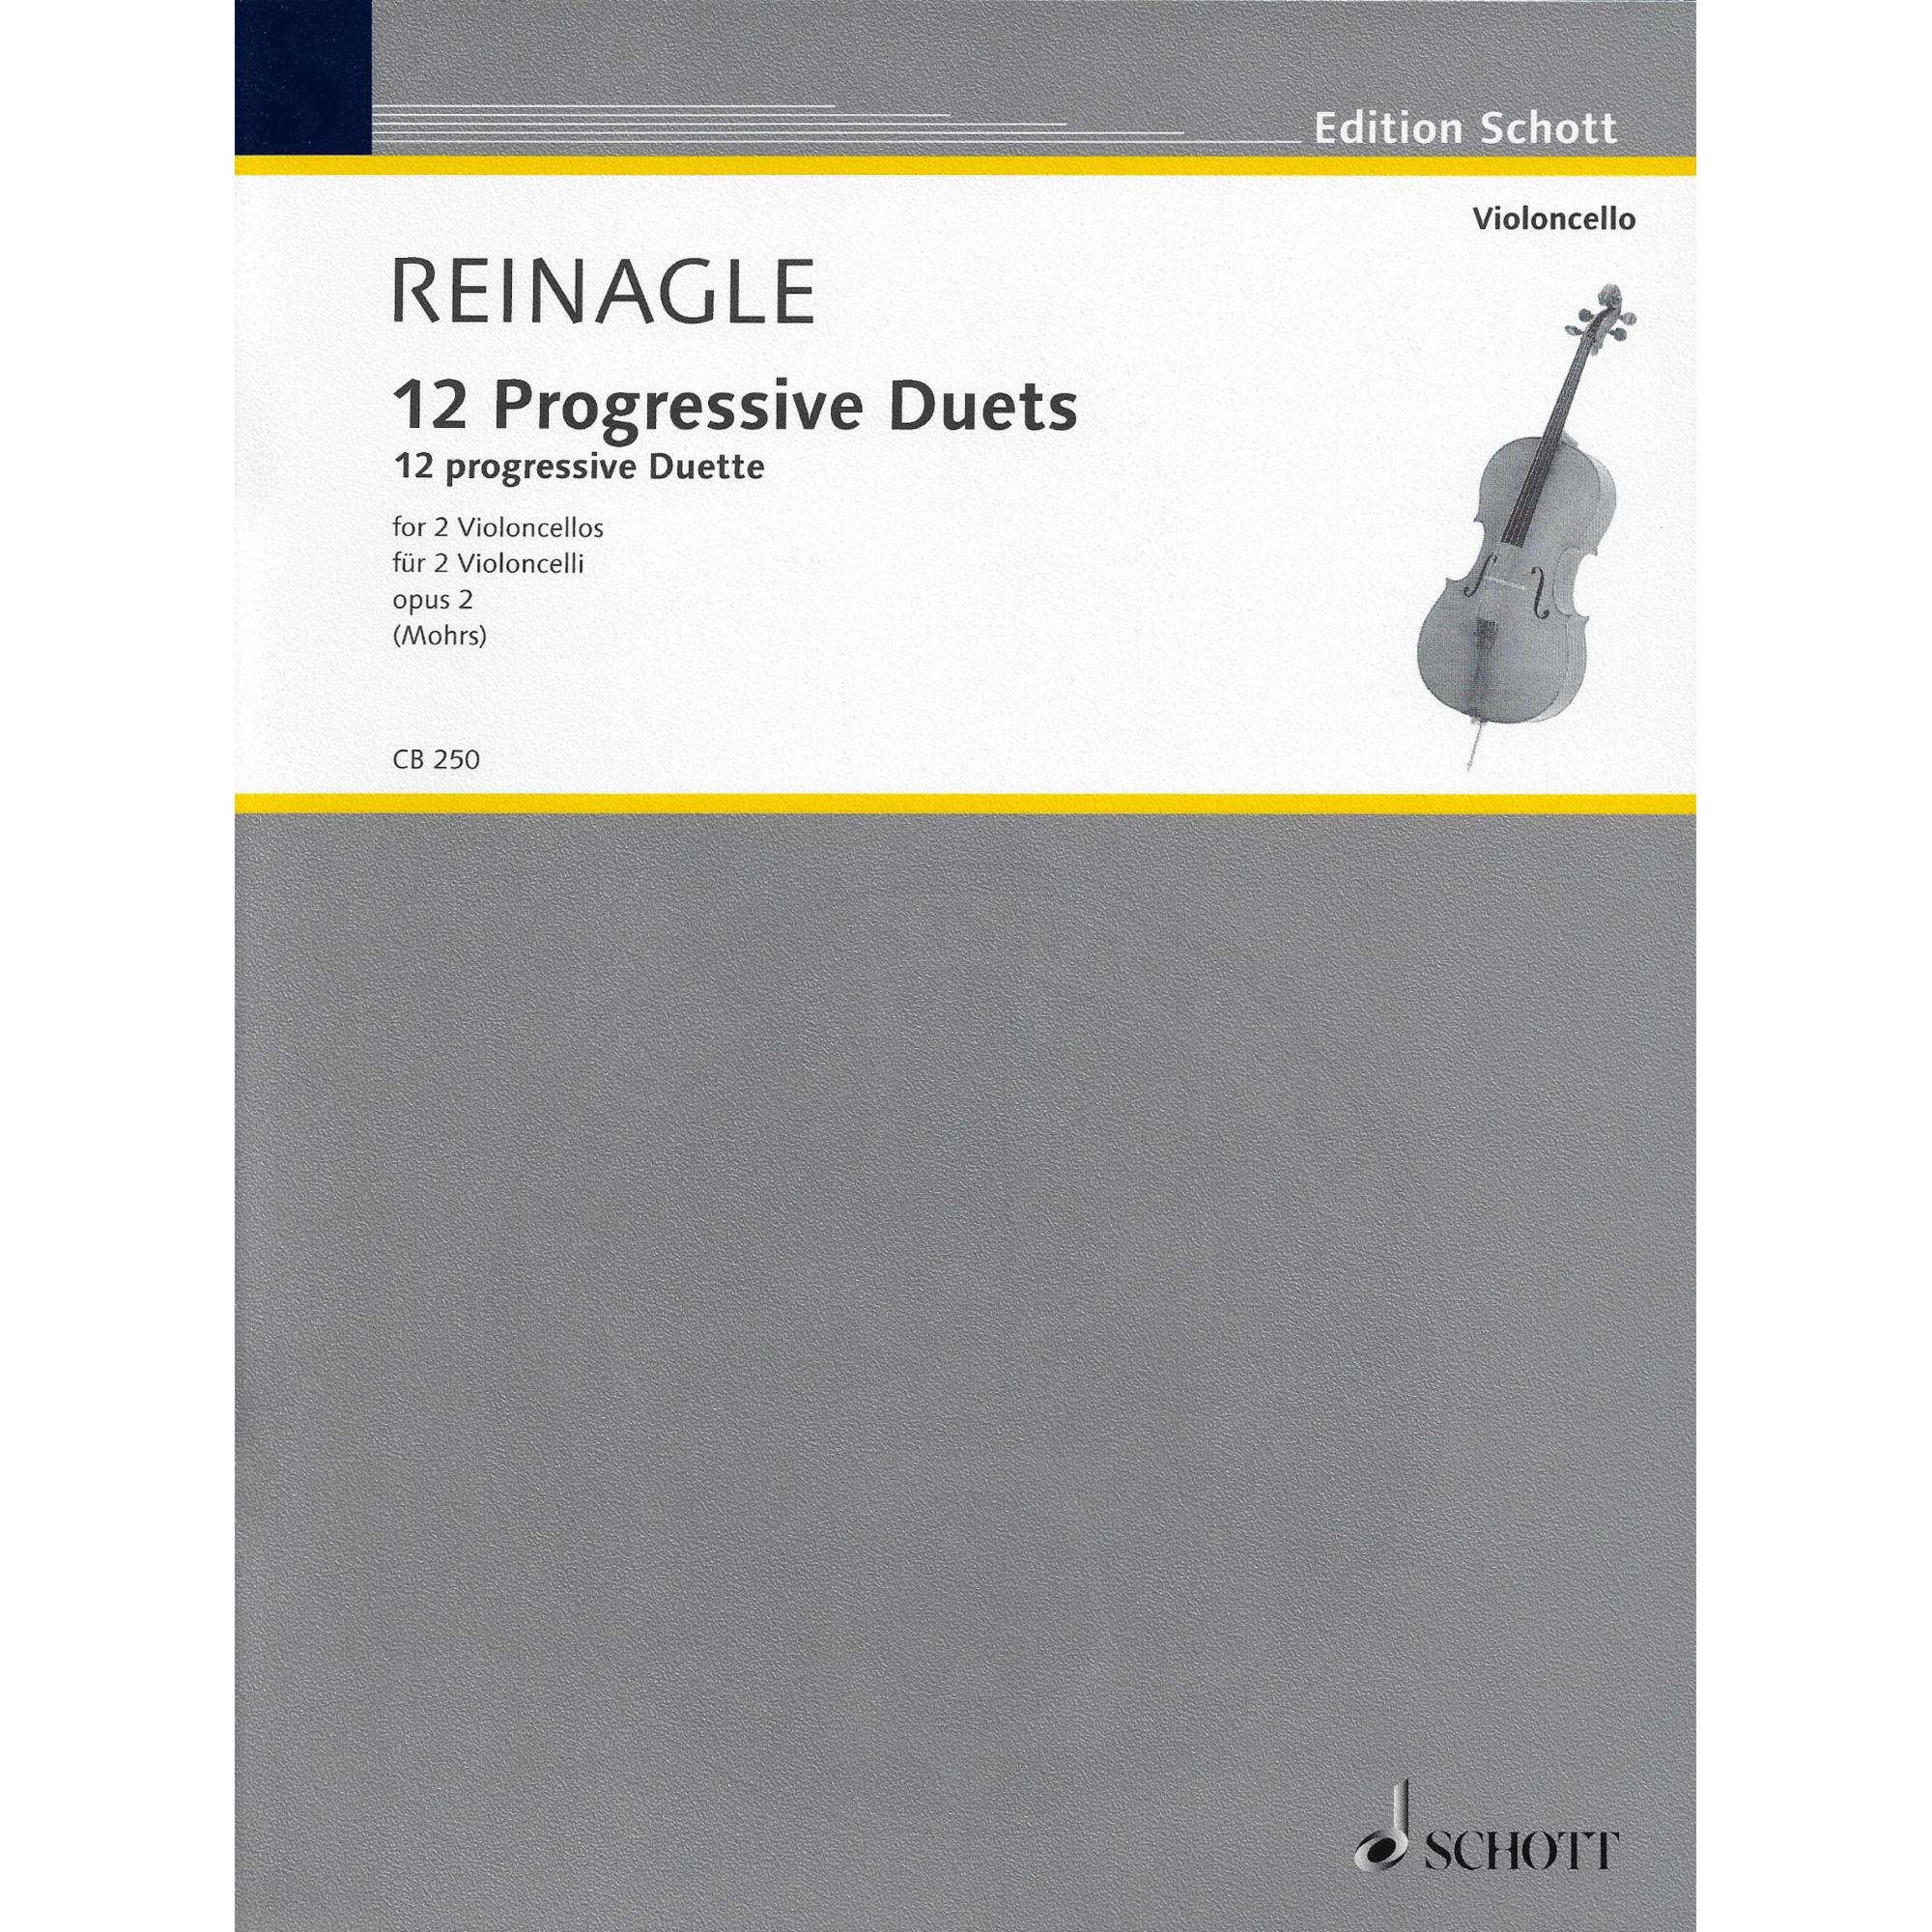 Reinagle -- 12 Progressive Duets, Op. 2 for Two Cellos